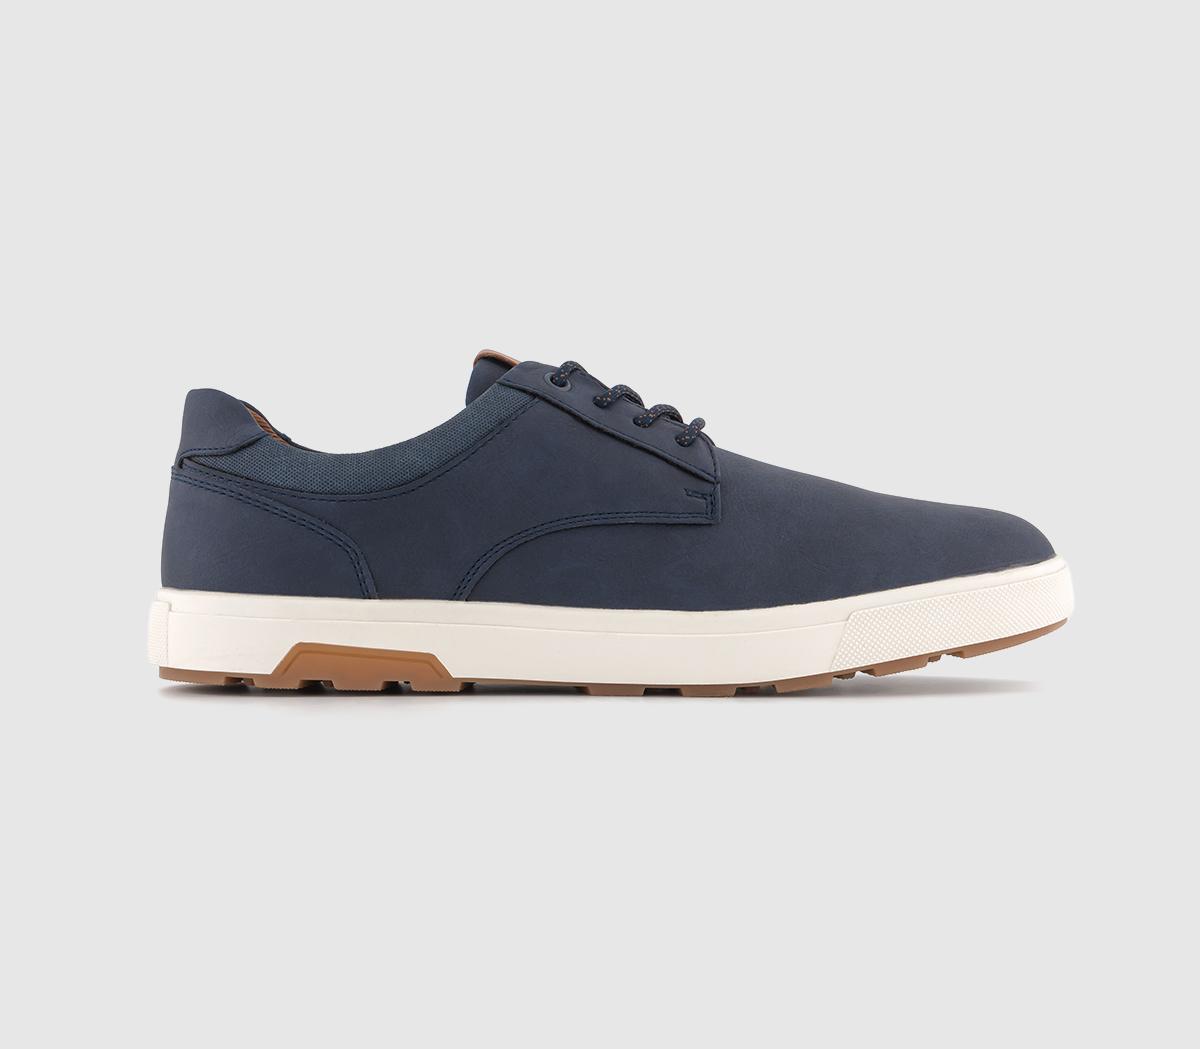 OFFICECannock Lace Up ShoesNavy